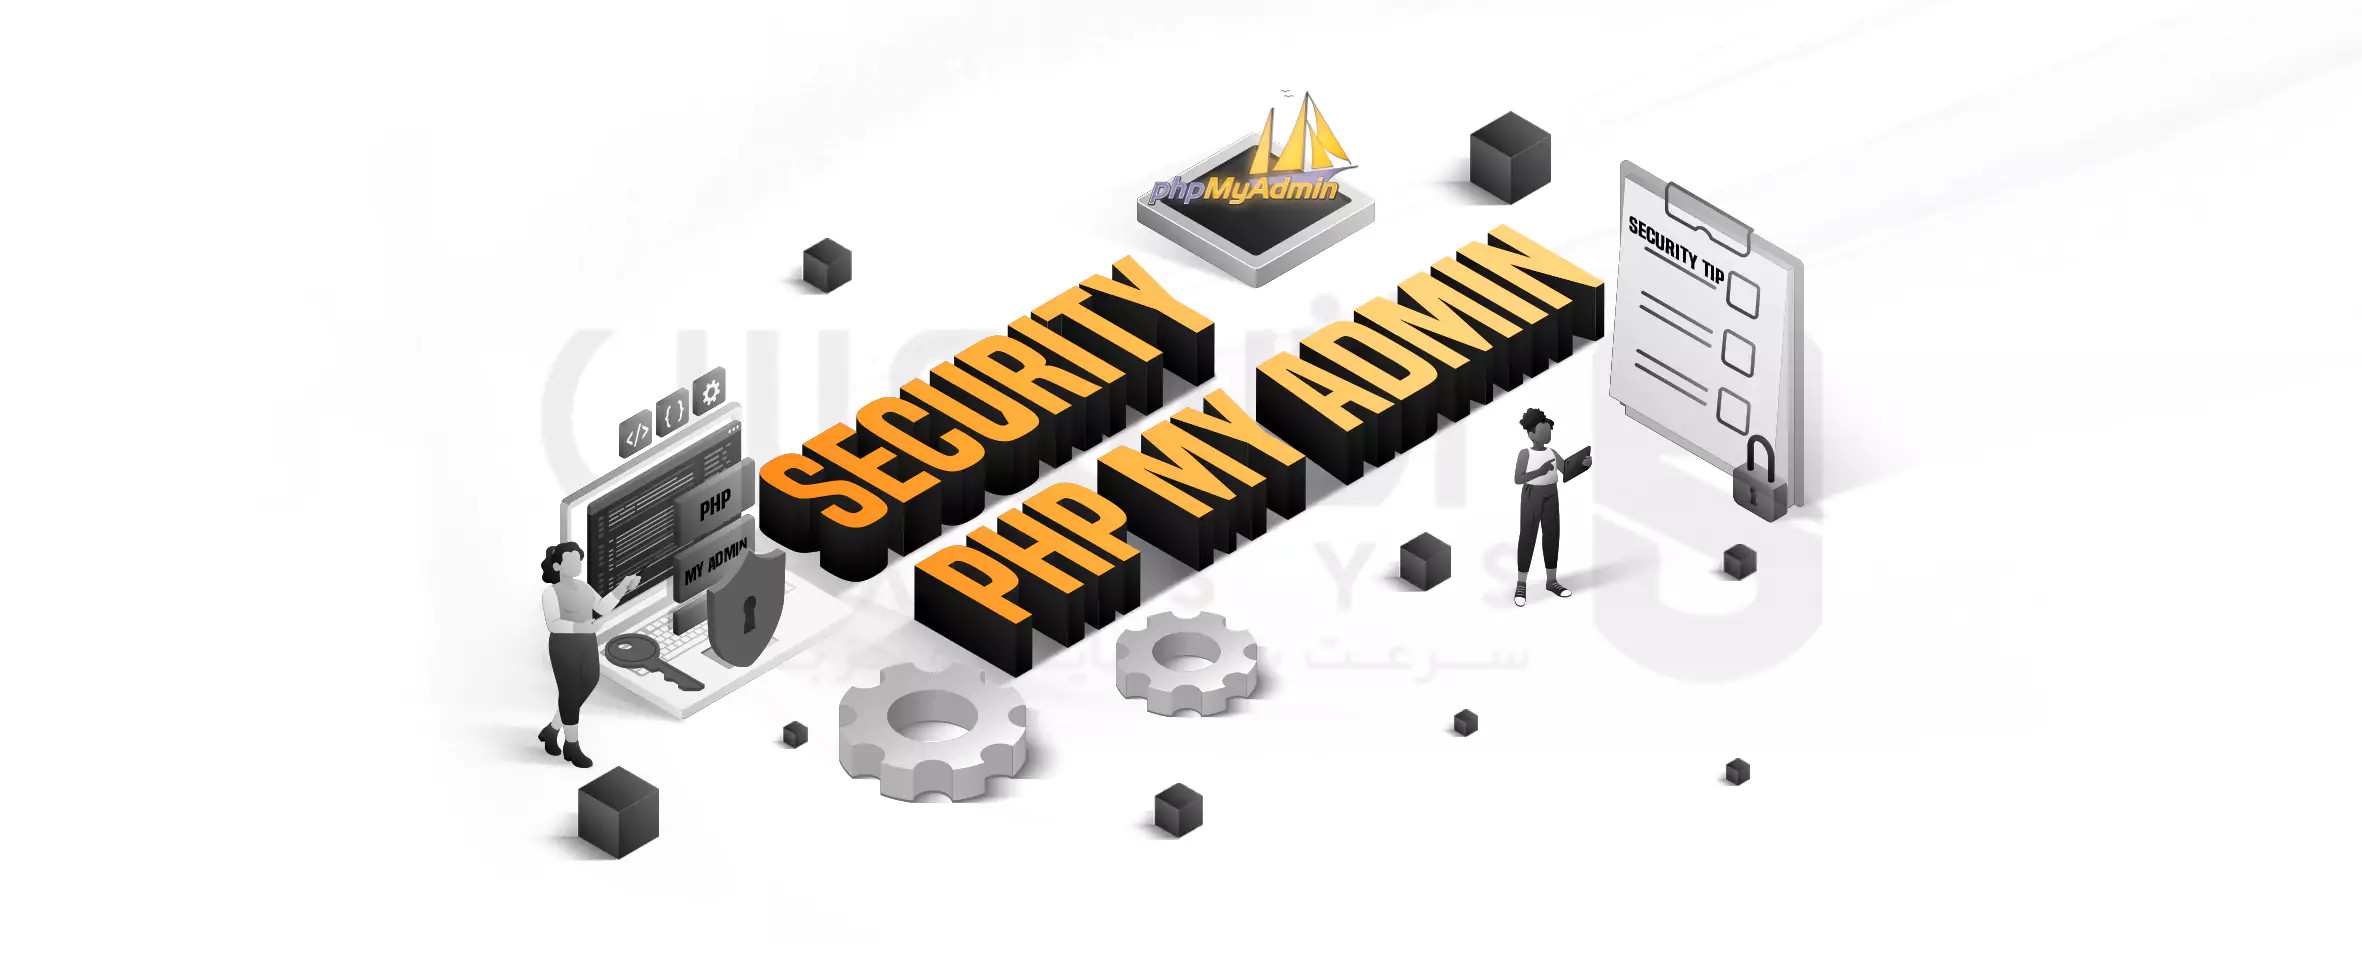 4 Useful Tips for Securing the PhpMyAdmin Login Interface